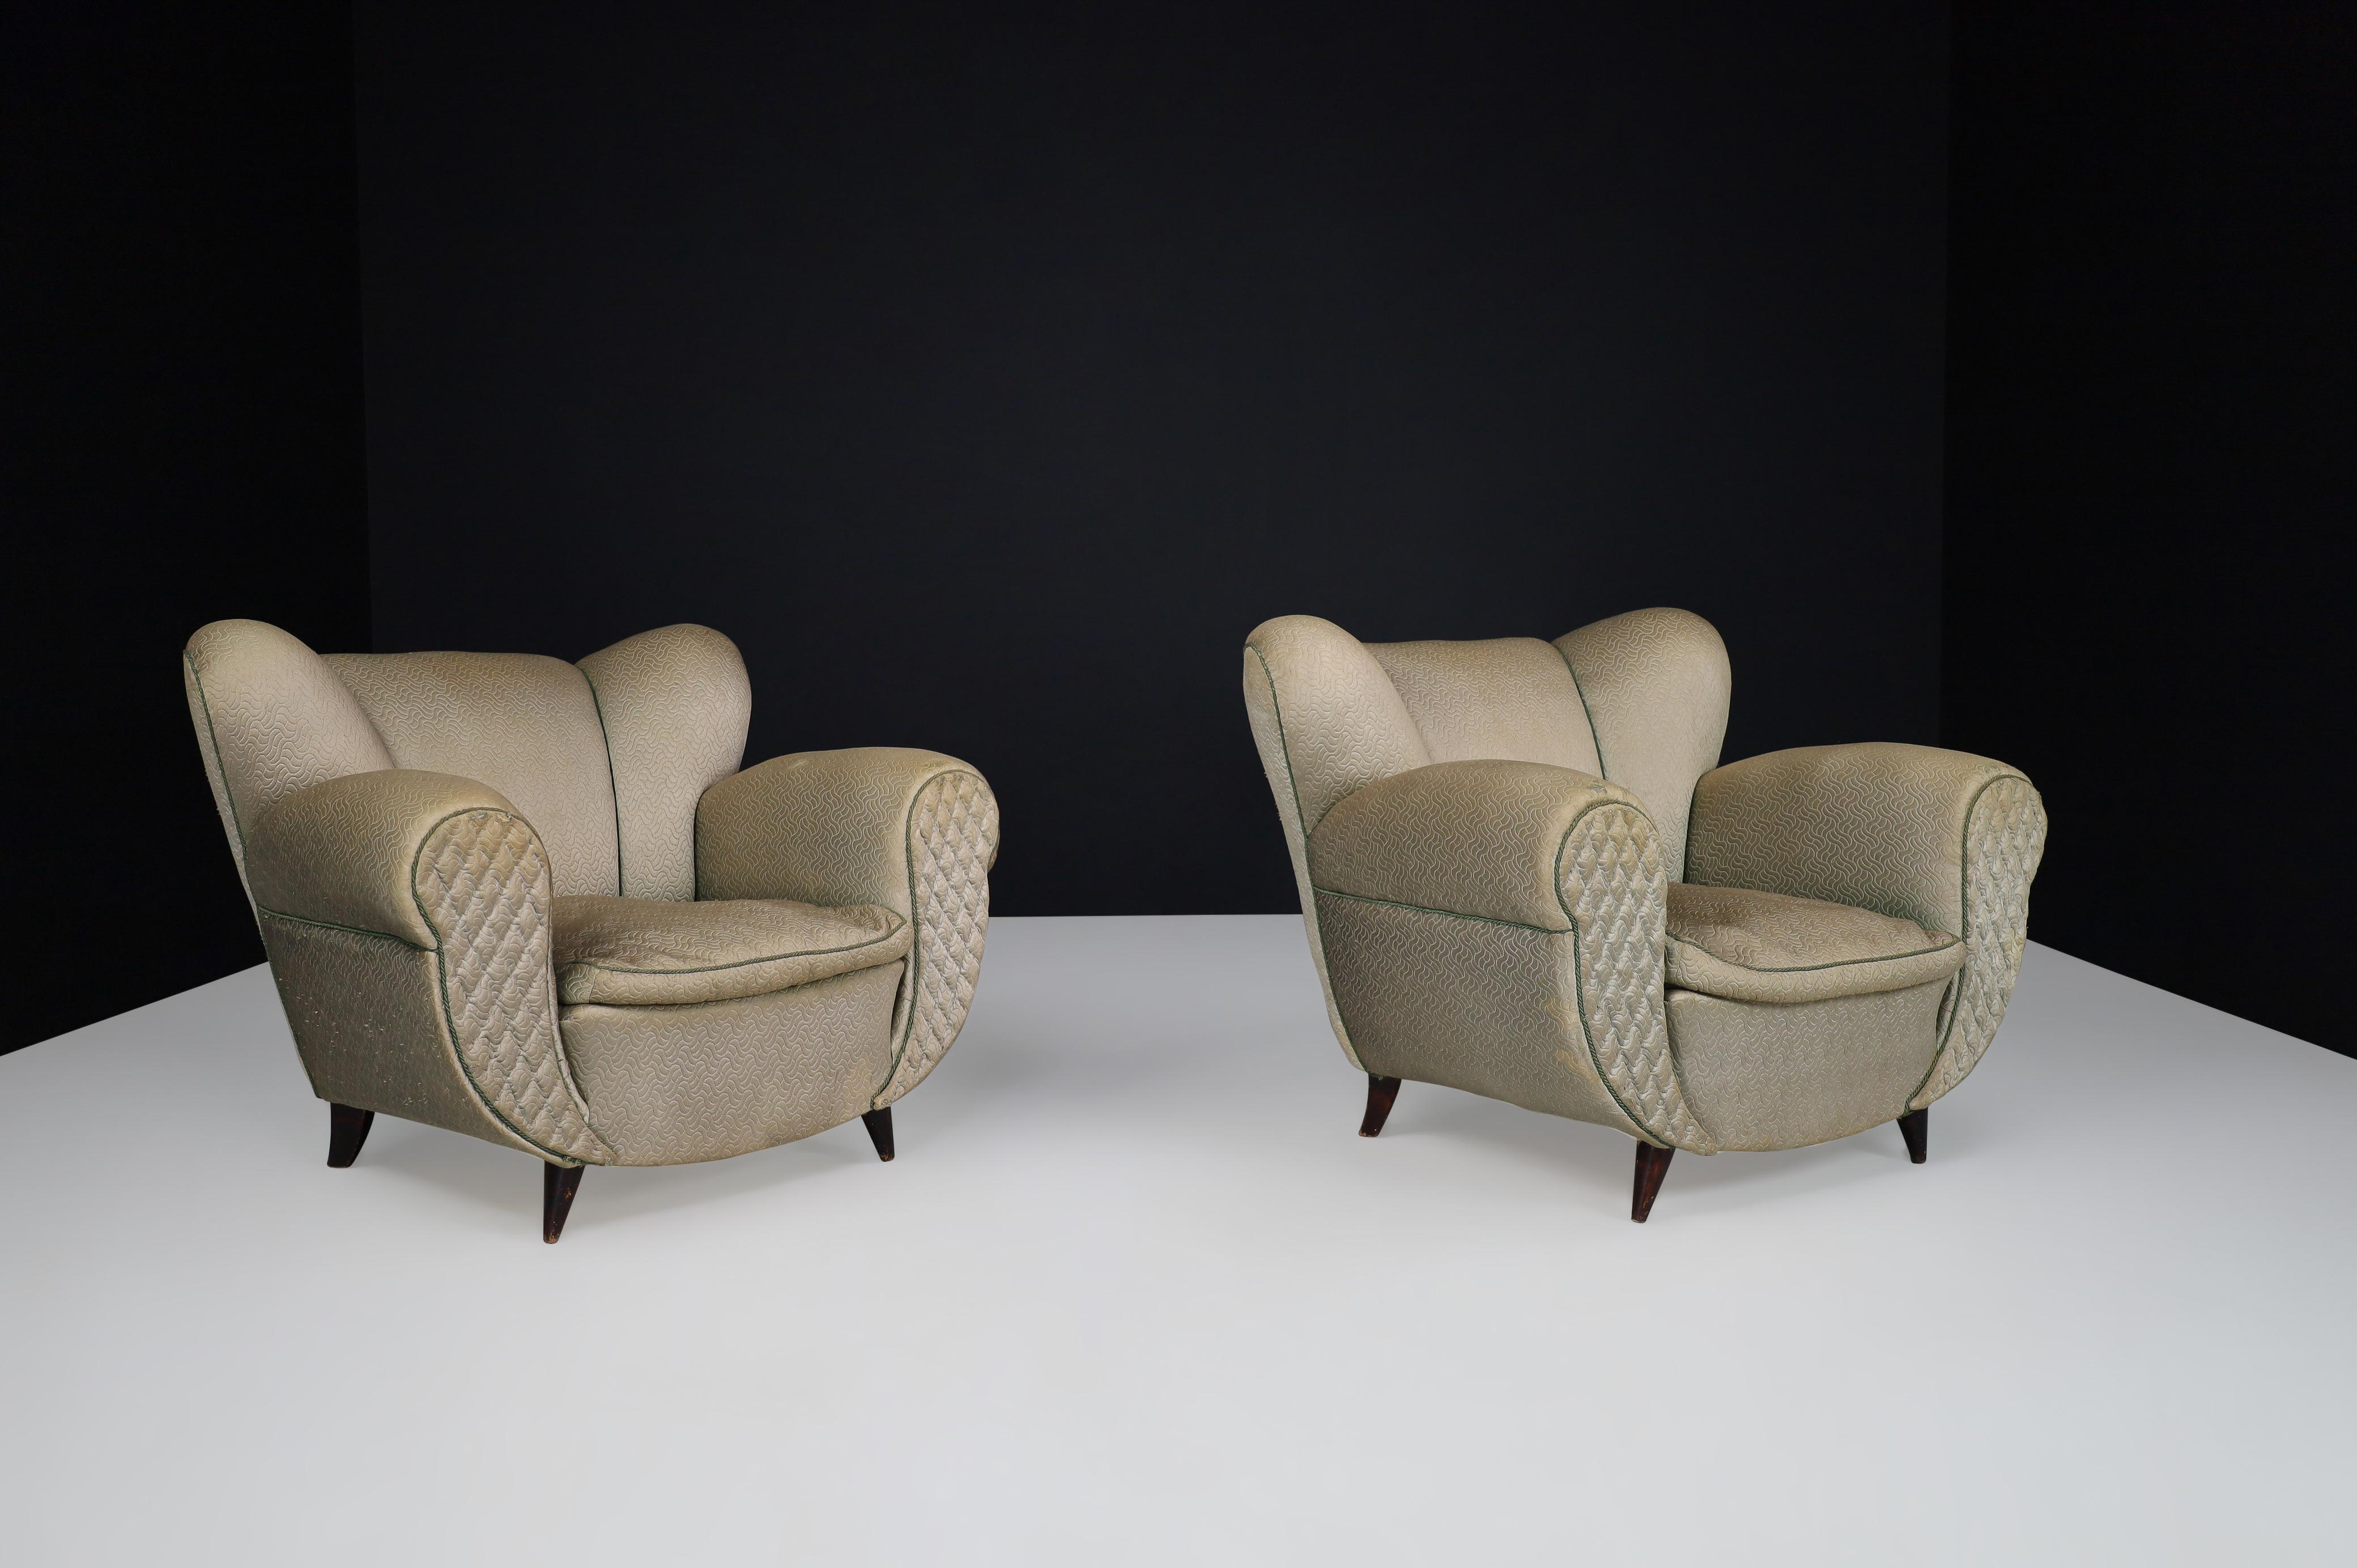 Uglielmo Ulrich Art Deco Lounge Chairs in Original Fabric, Italy 1930s For Sale 1